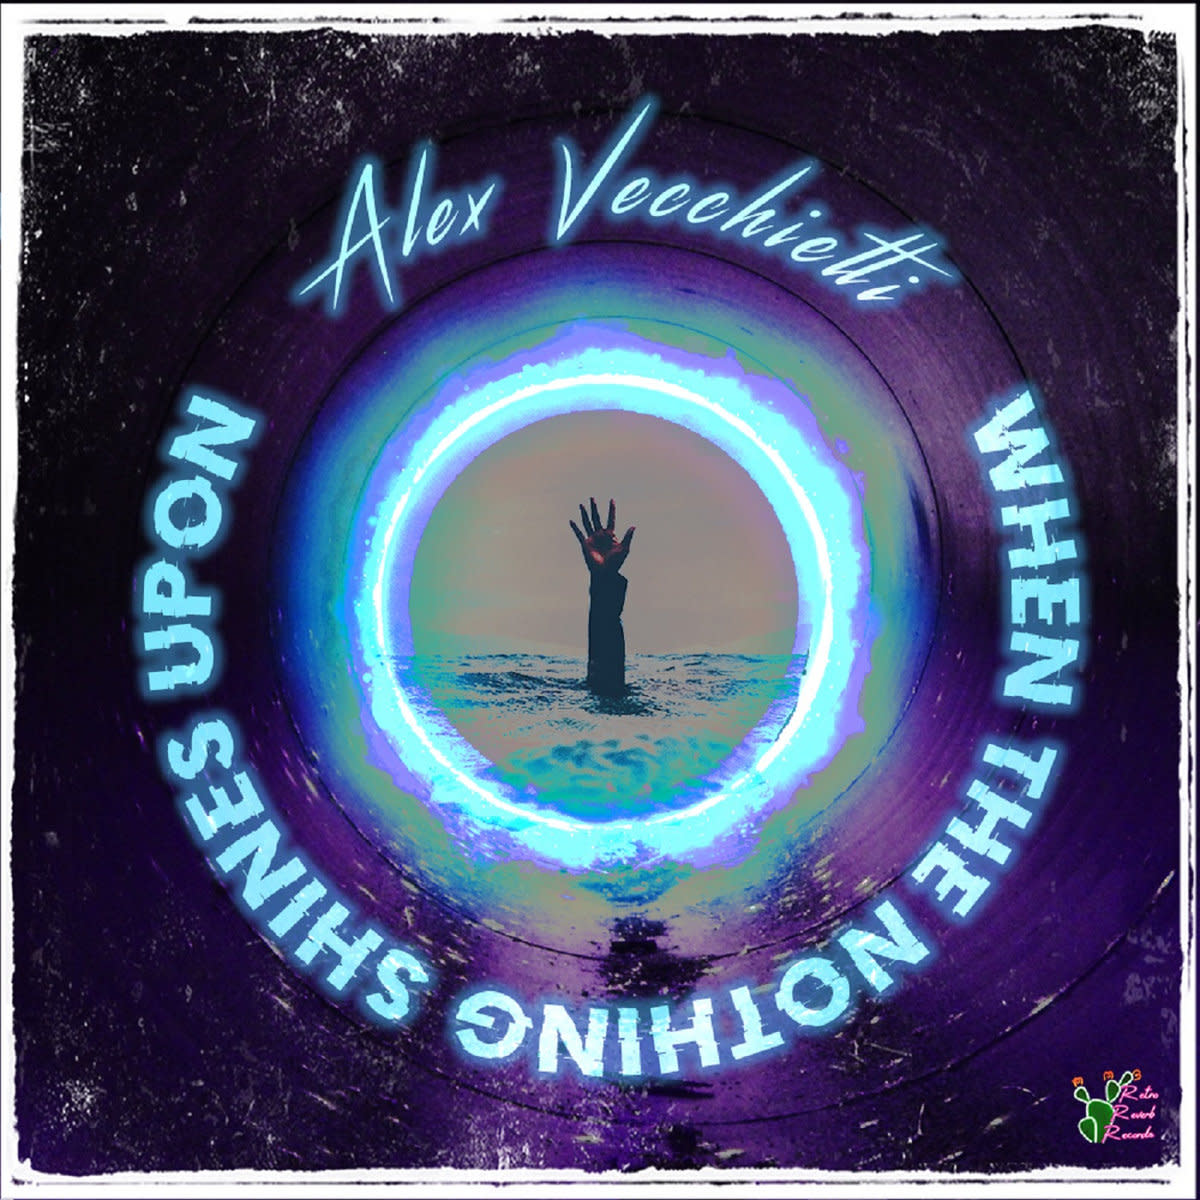 Synth Album Review: "When The Nothing Shines Upon" by Alex Vecchietti